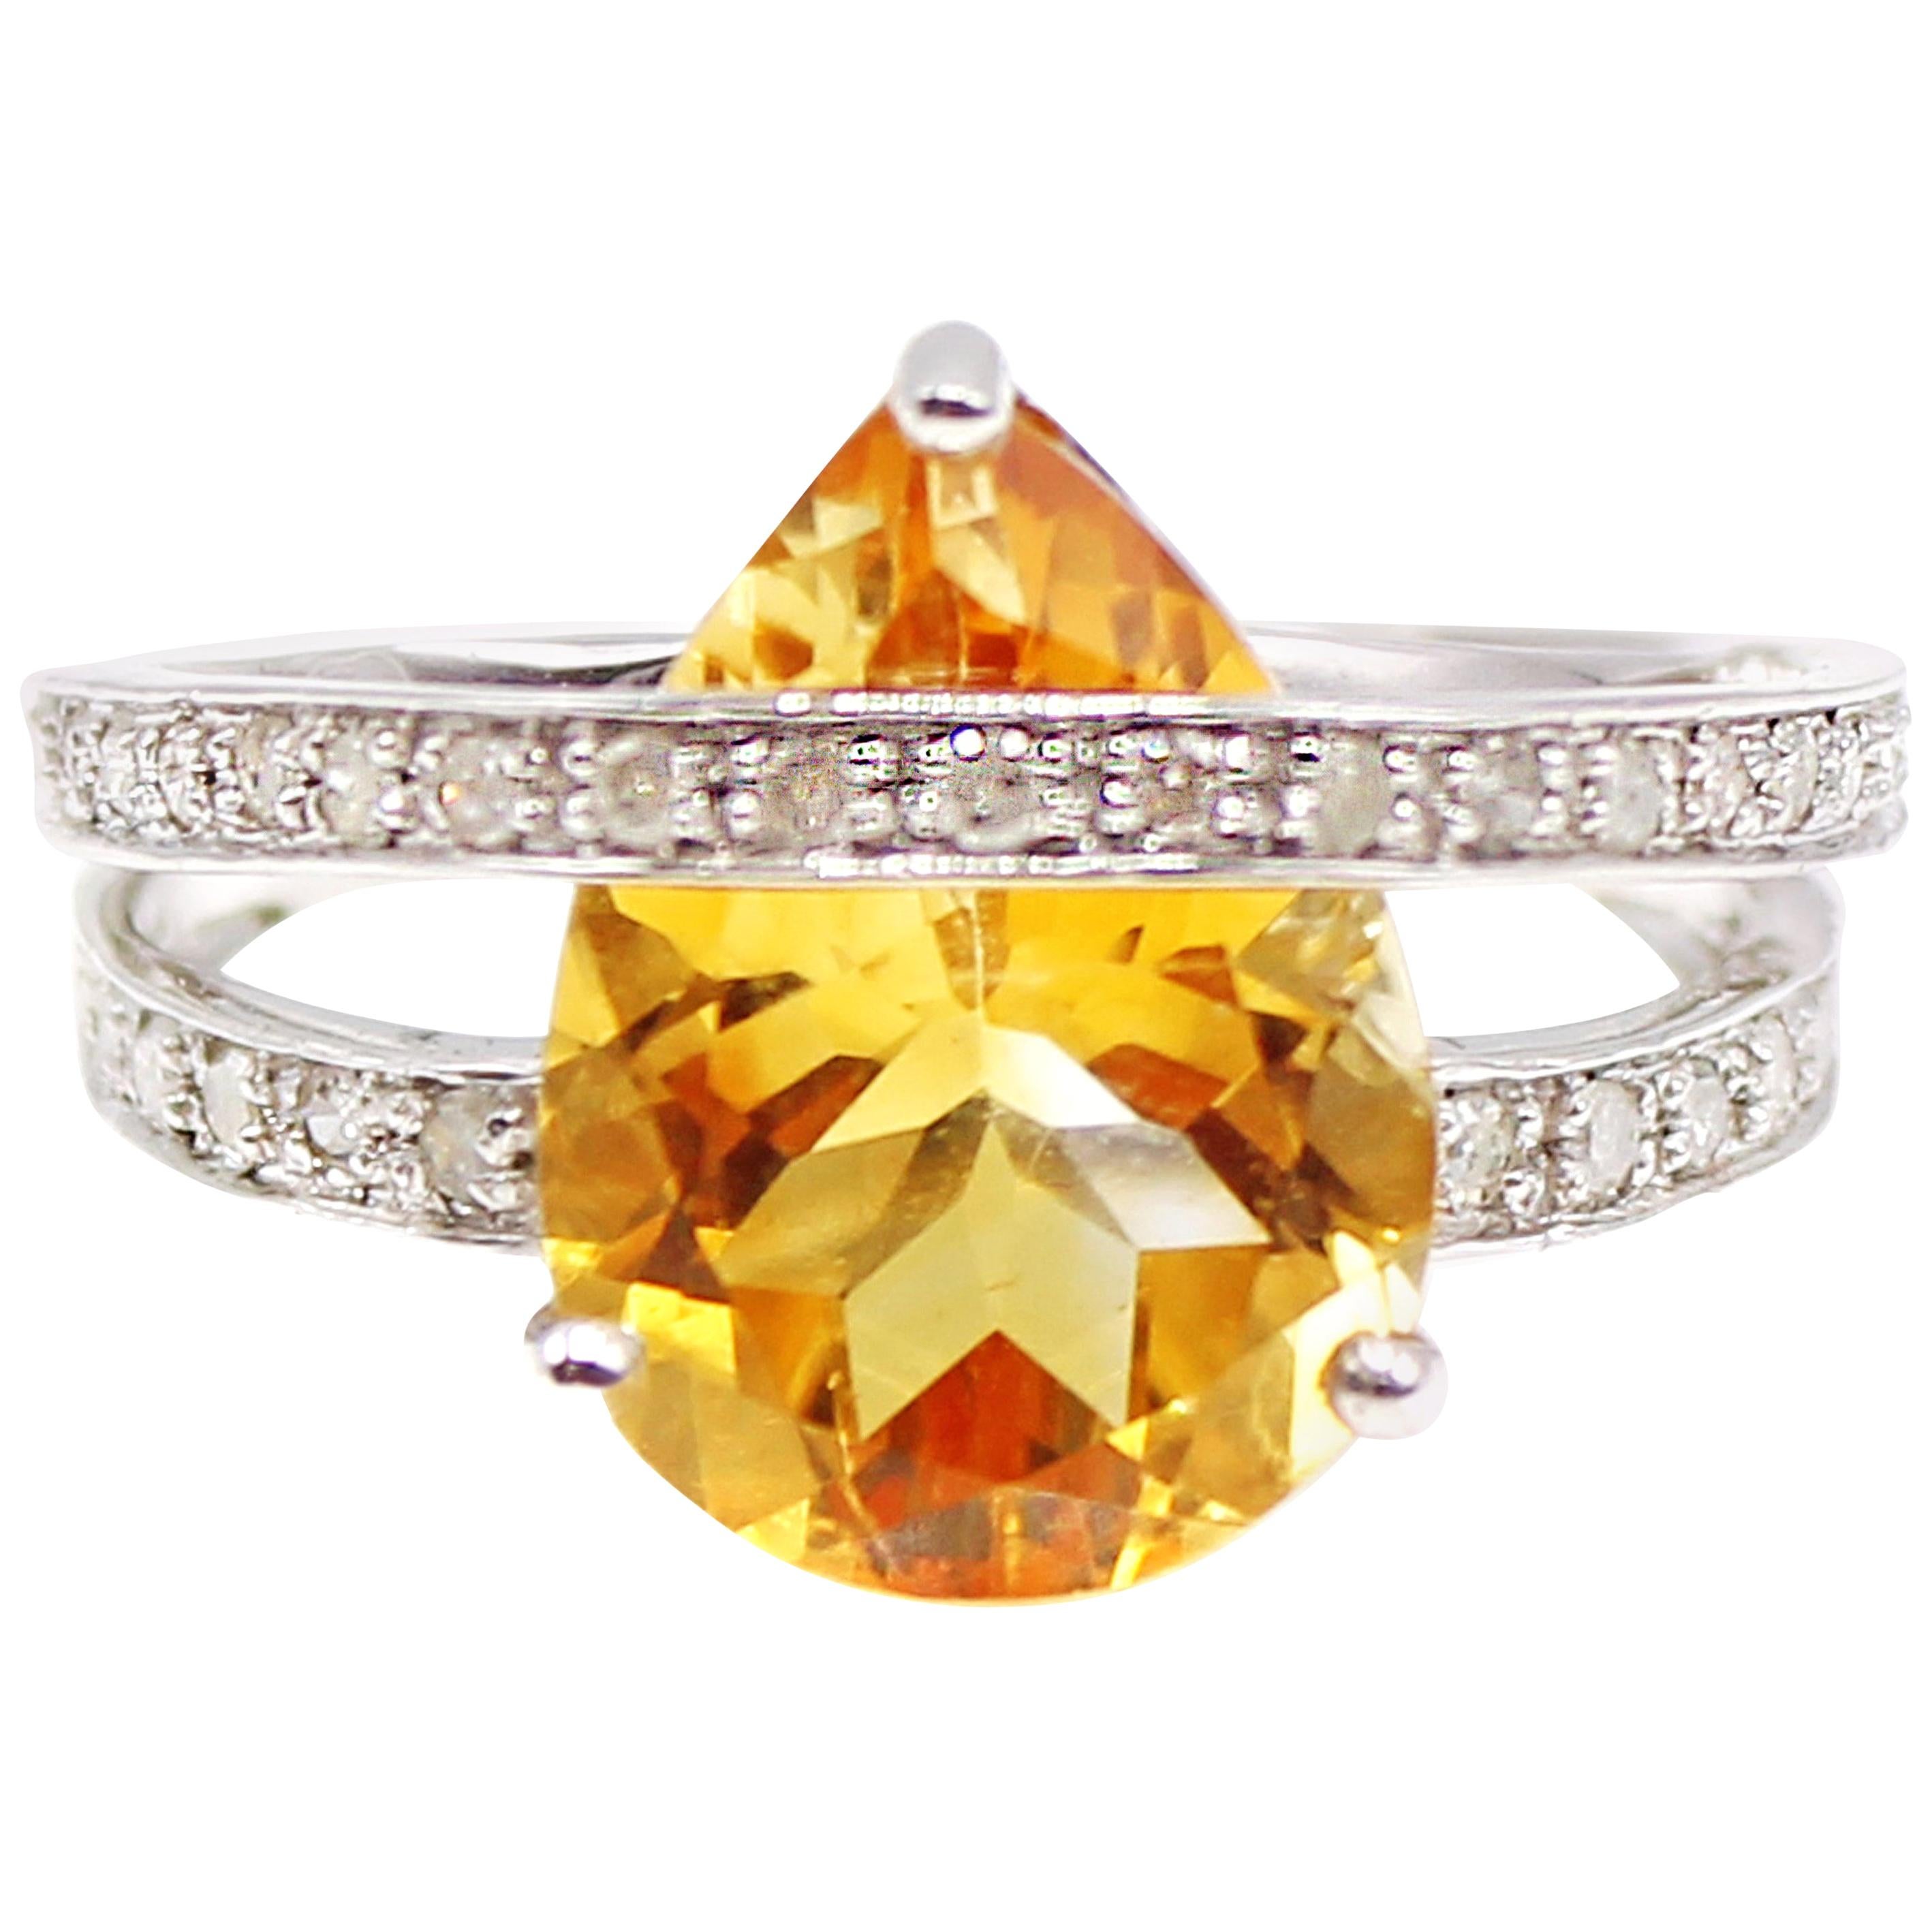 Golden Pear Shaped Citrine Diamond White Gold Double Band Ring